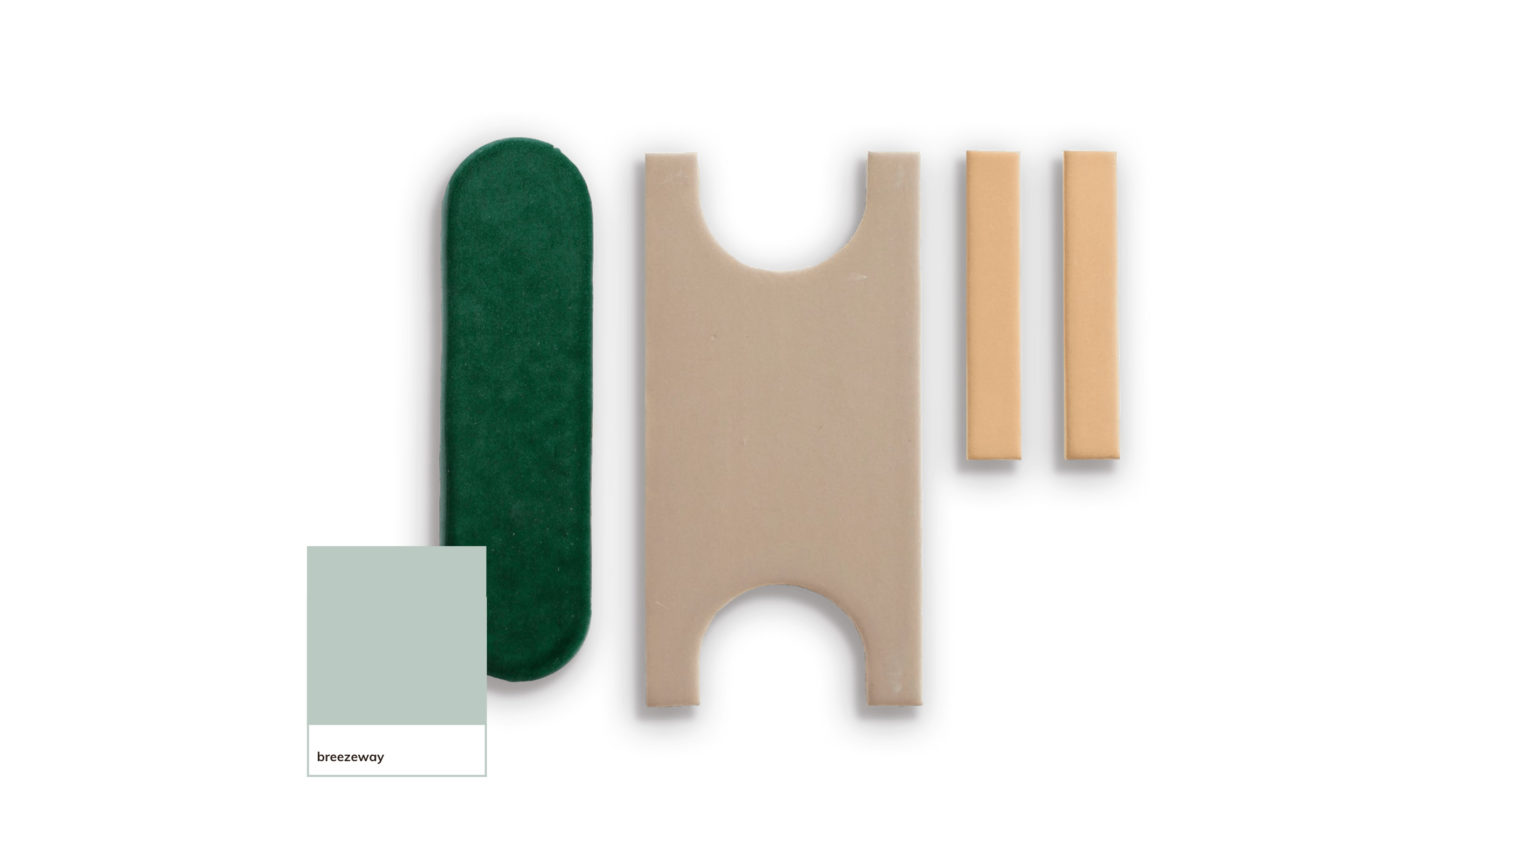 an image showing a pairing of Behr Breezeway green with Fornace Brioni’s glazed ceramic Tivoli 